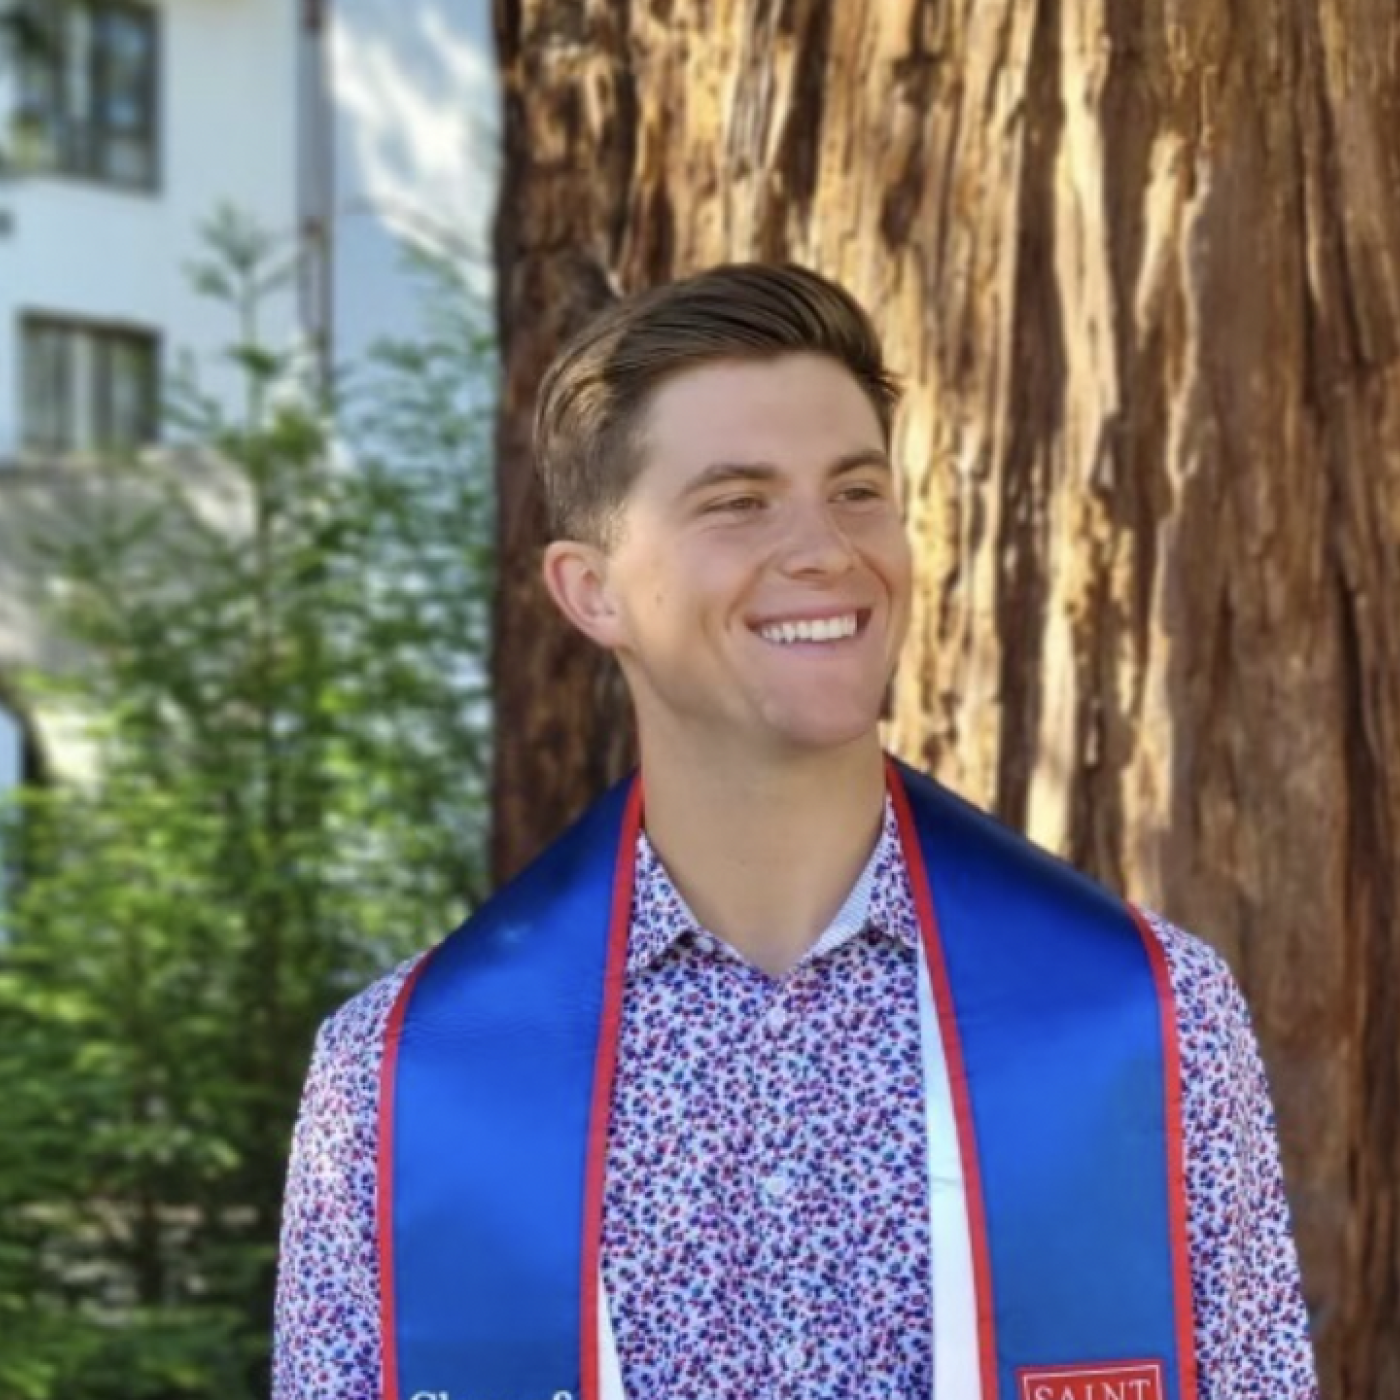 A student posing with a stole around his neck